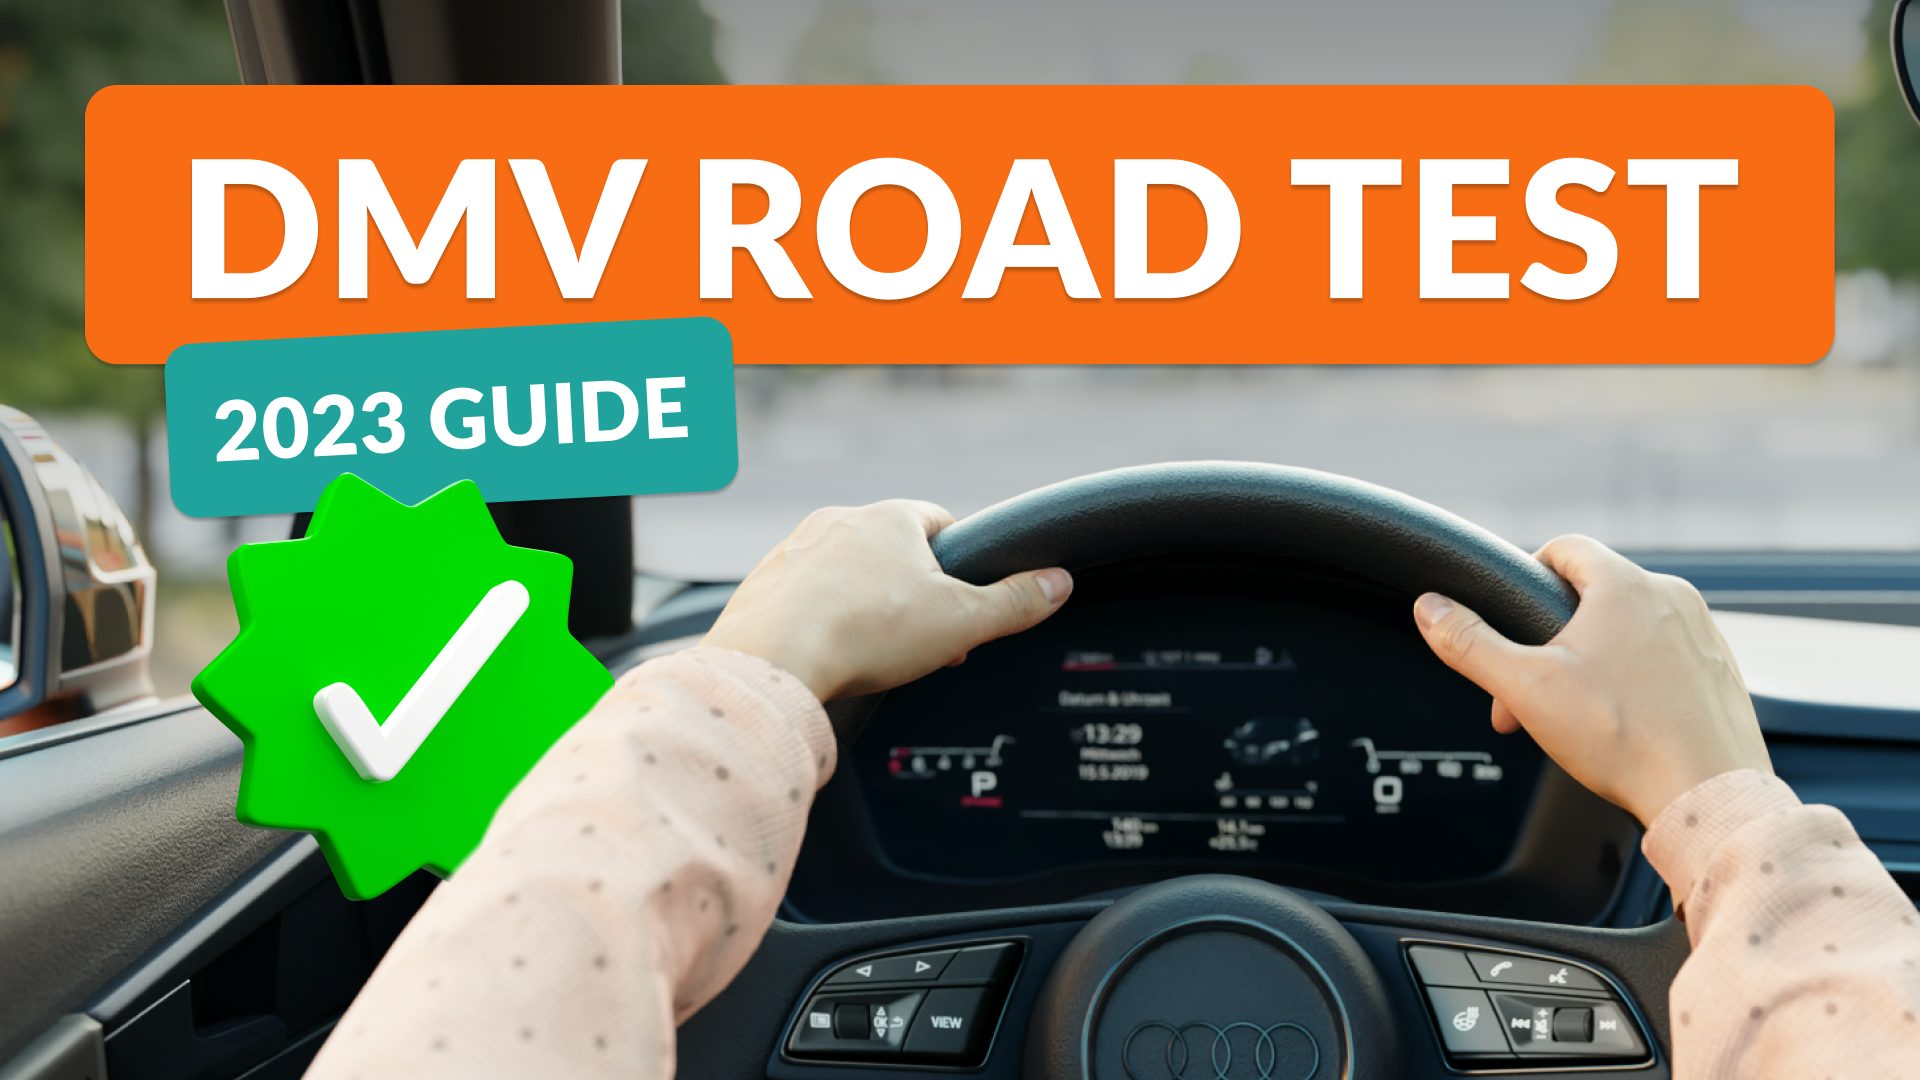 DMV Road Test: The Ultimate Guide